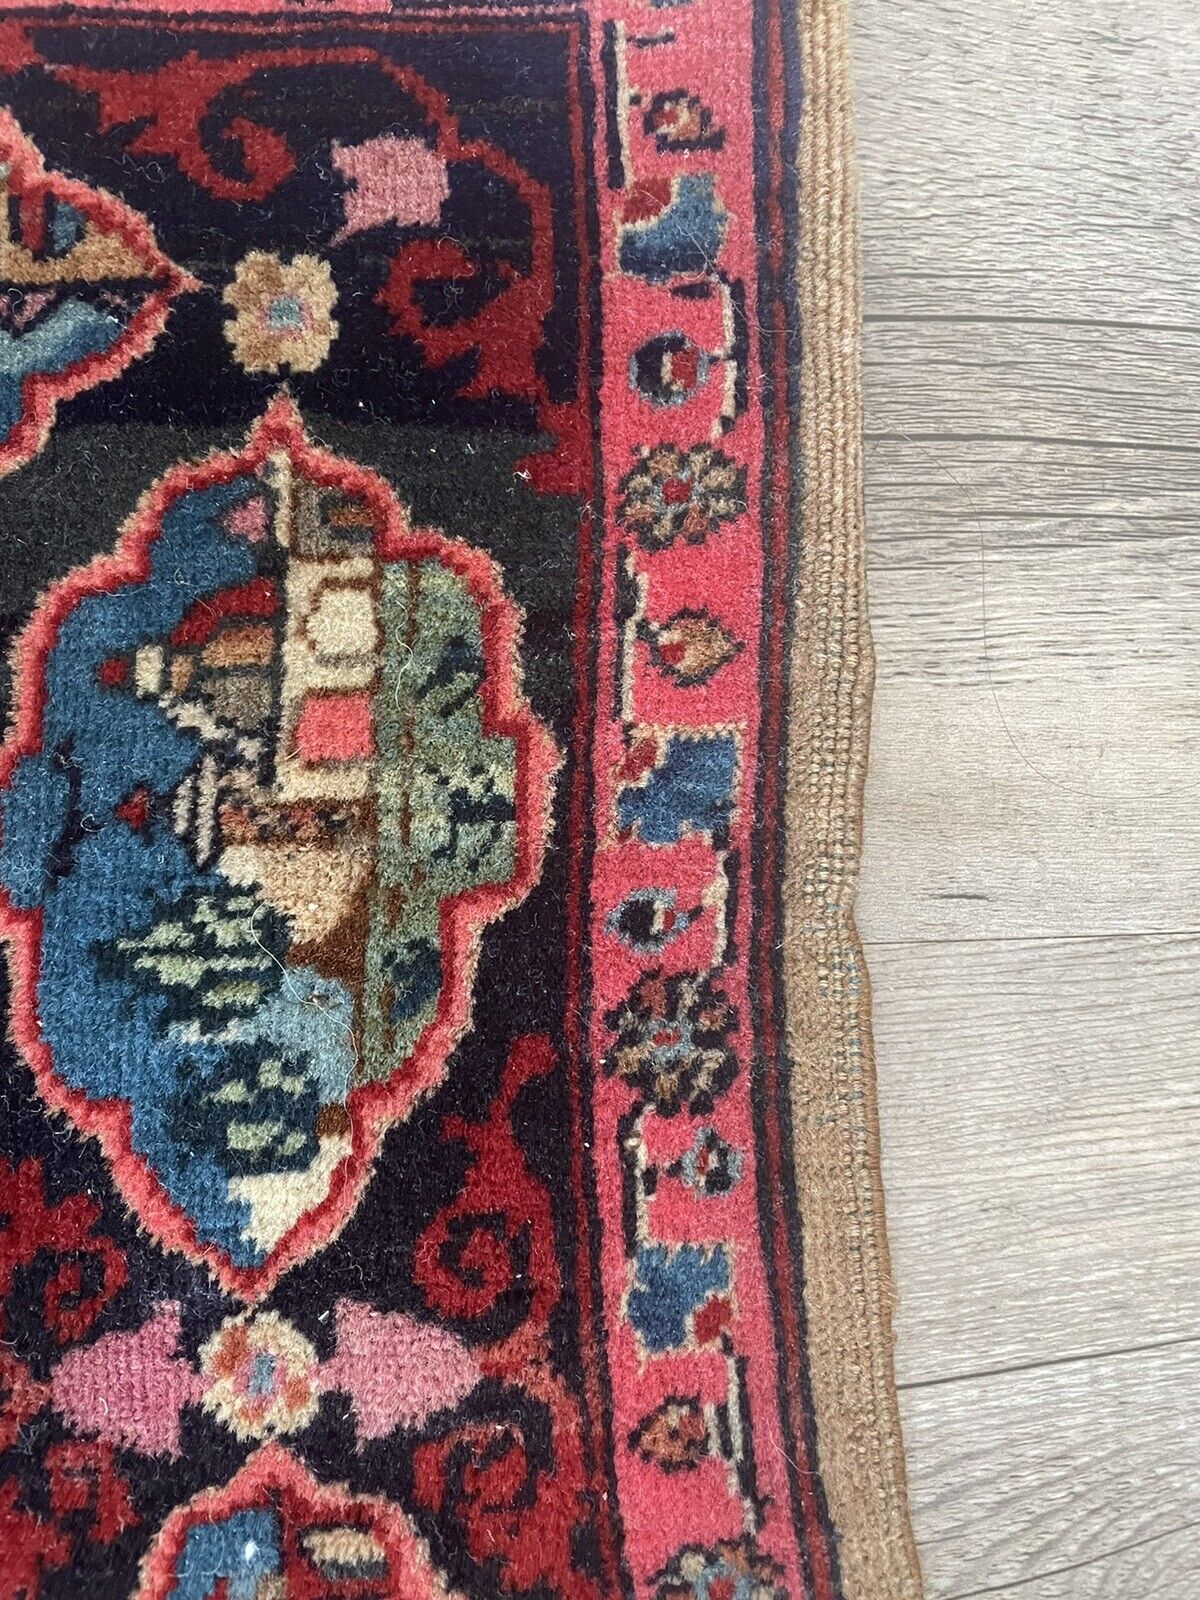 Close-up of wear on Handmade Antique Persian Kashan Collectible Rug - Detailed view showing some low pile and wear over time, indicating the rug's age and history.